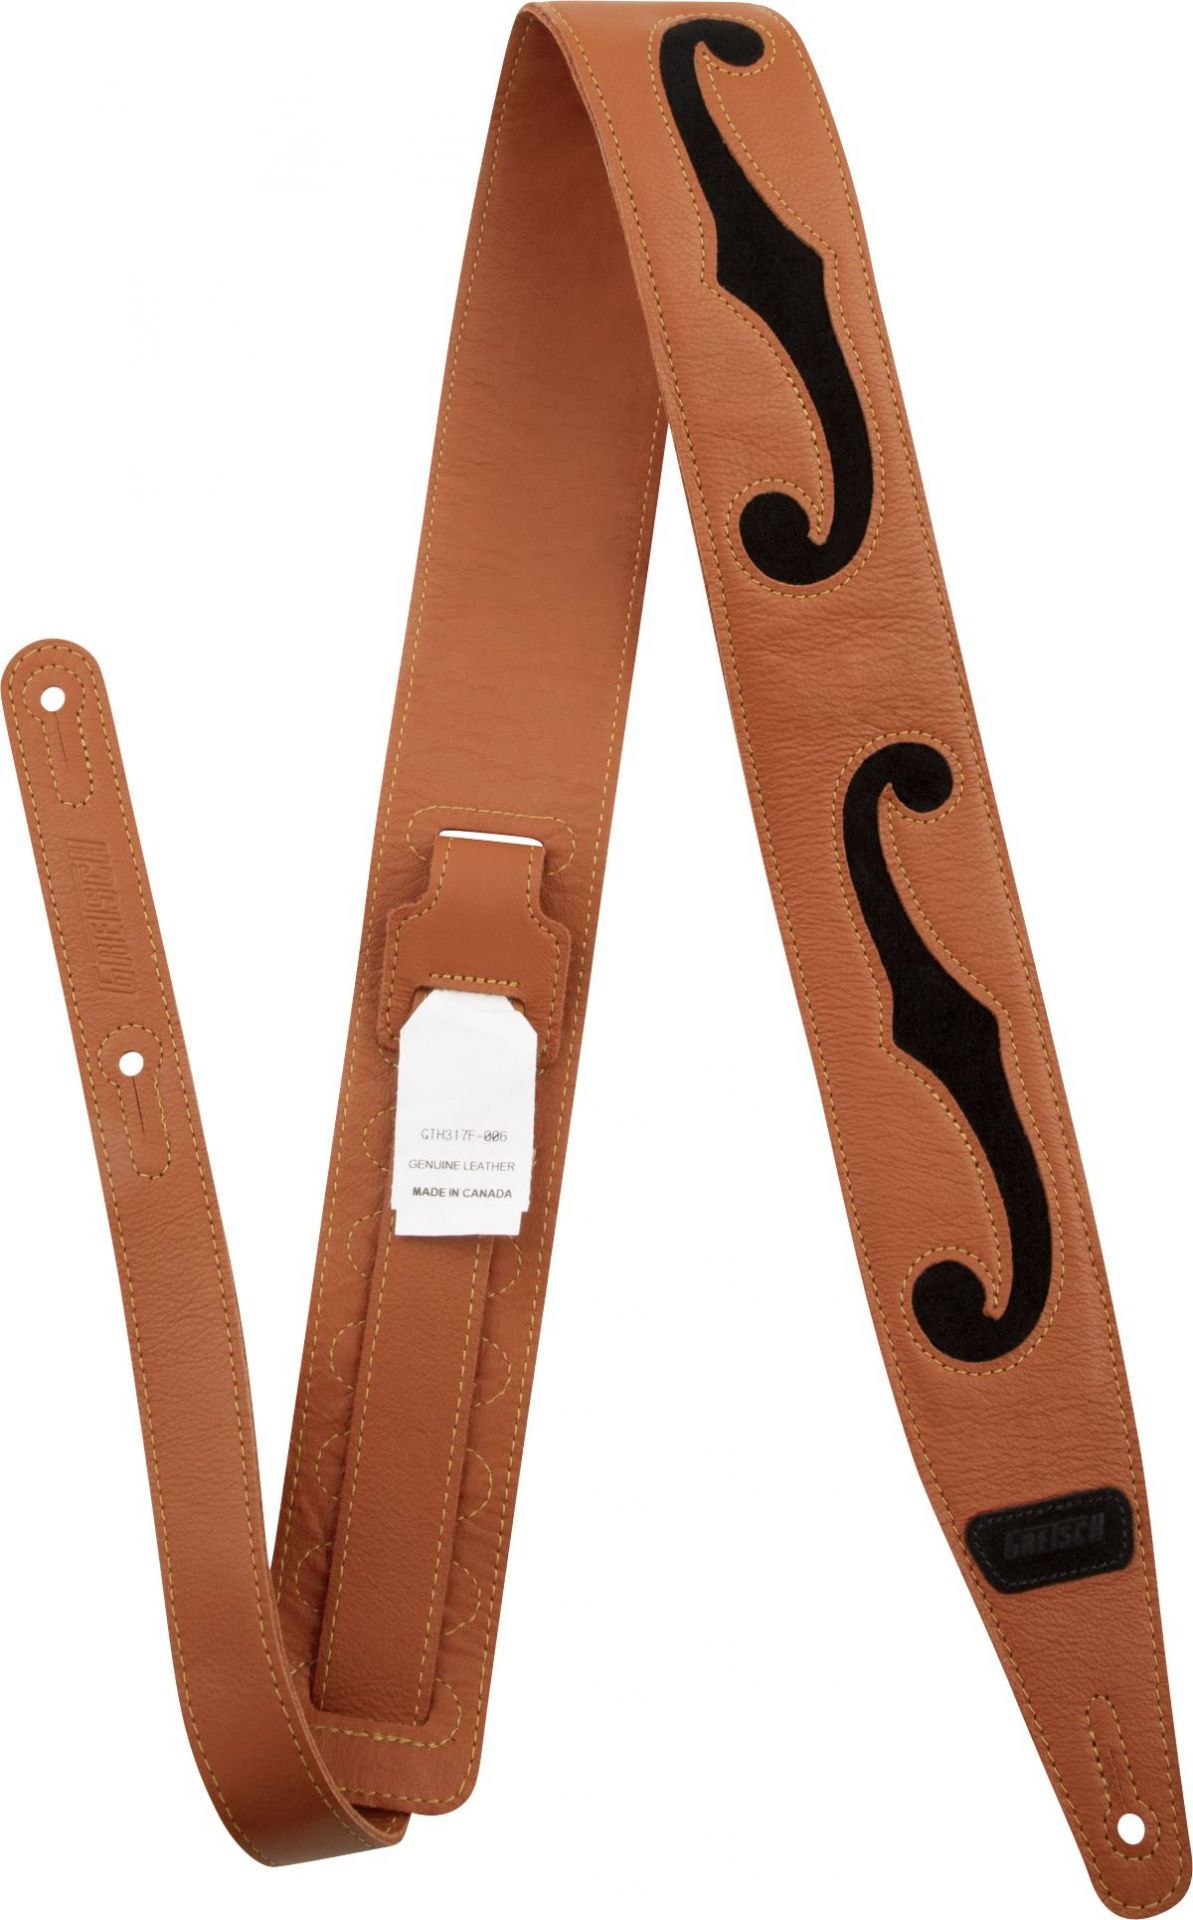 Gretsch F-Holes Leather Straps Orange and Black Orange with Black Accents